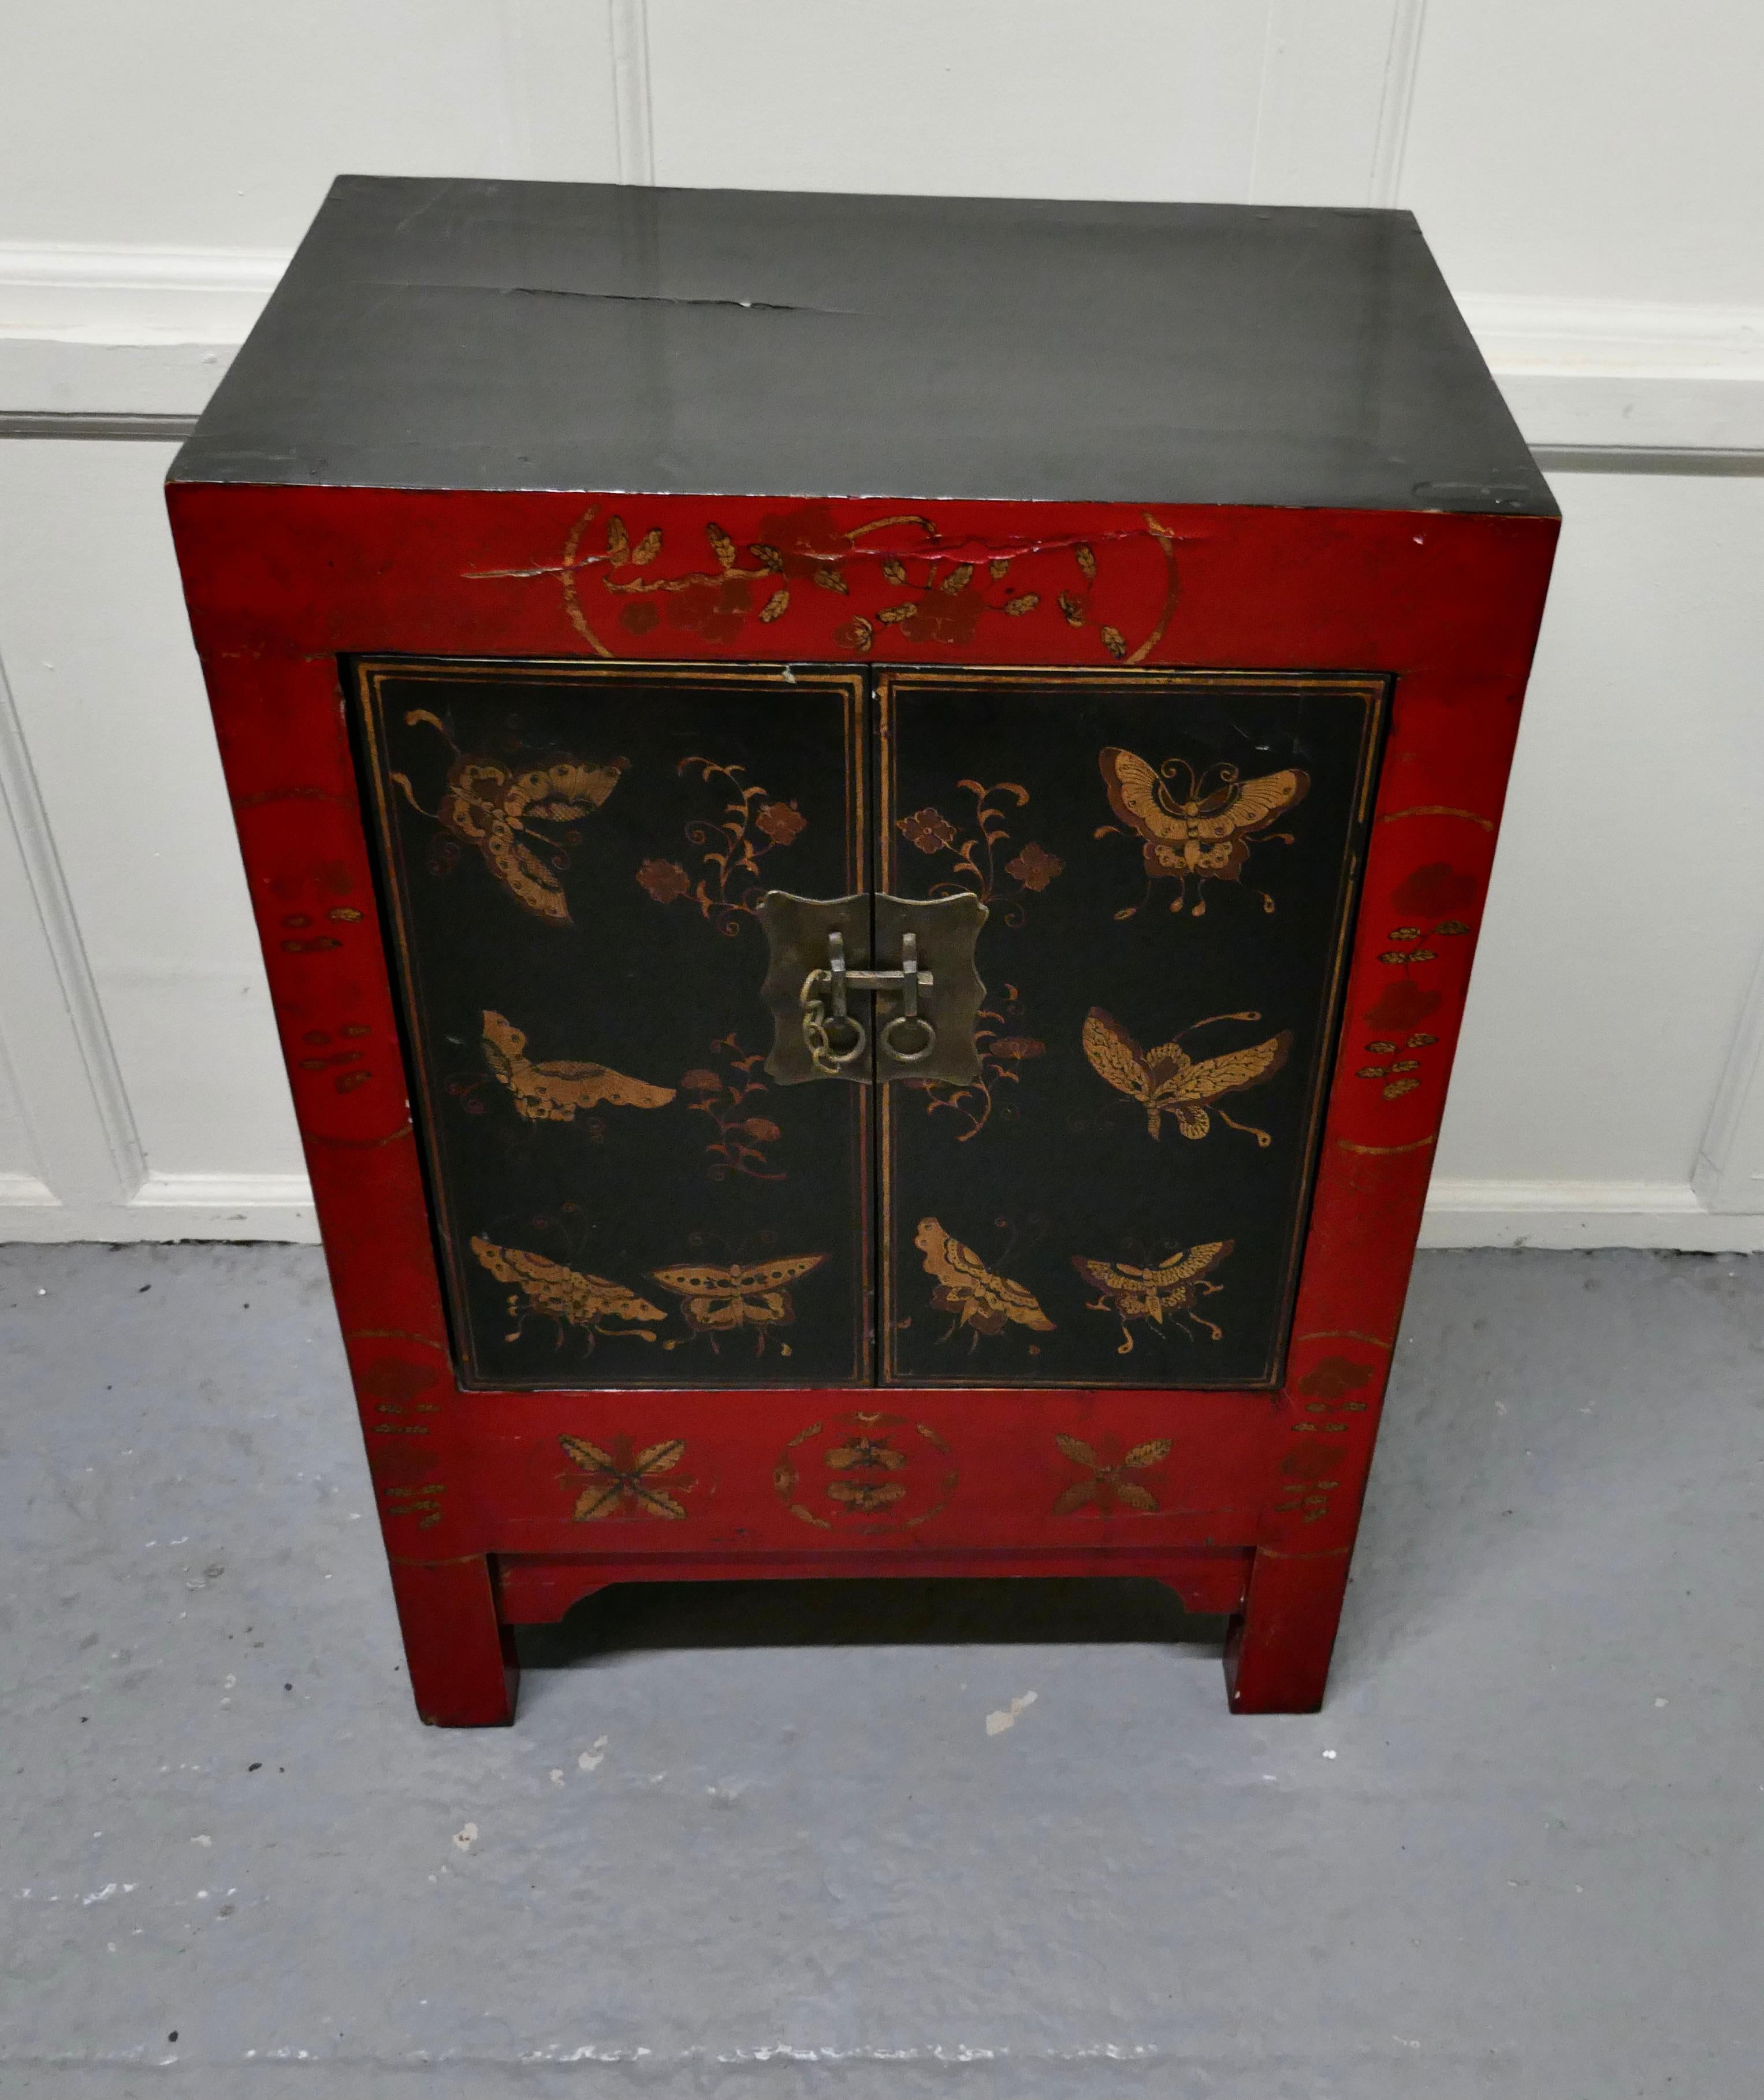 Red and black chinoiserie lacquer cupboard decorated with butterflies

The cupboard is made in wood, it is decorated with butterflies, the Chinese symbol for happiness and new love

The cupboard has 2 doors, they have a large lock plate complete